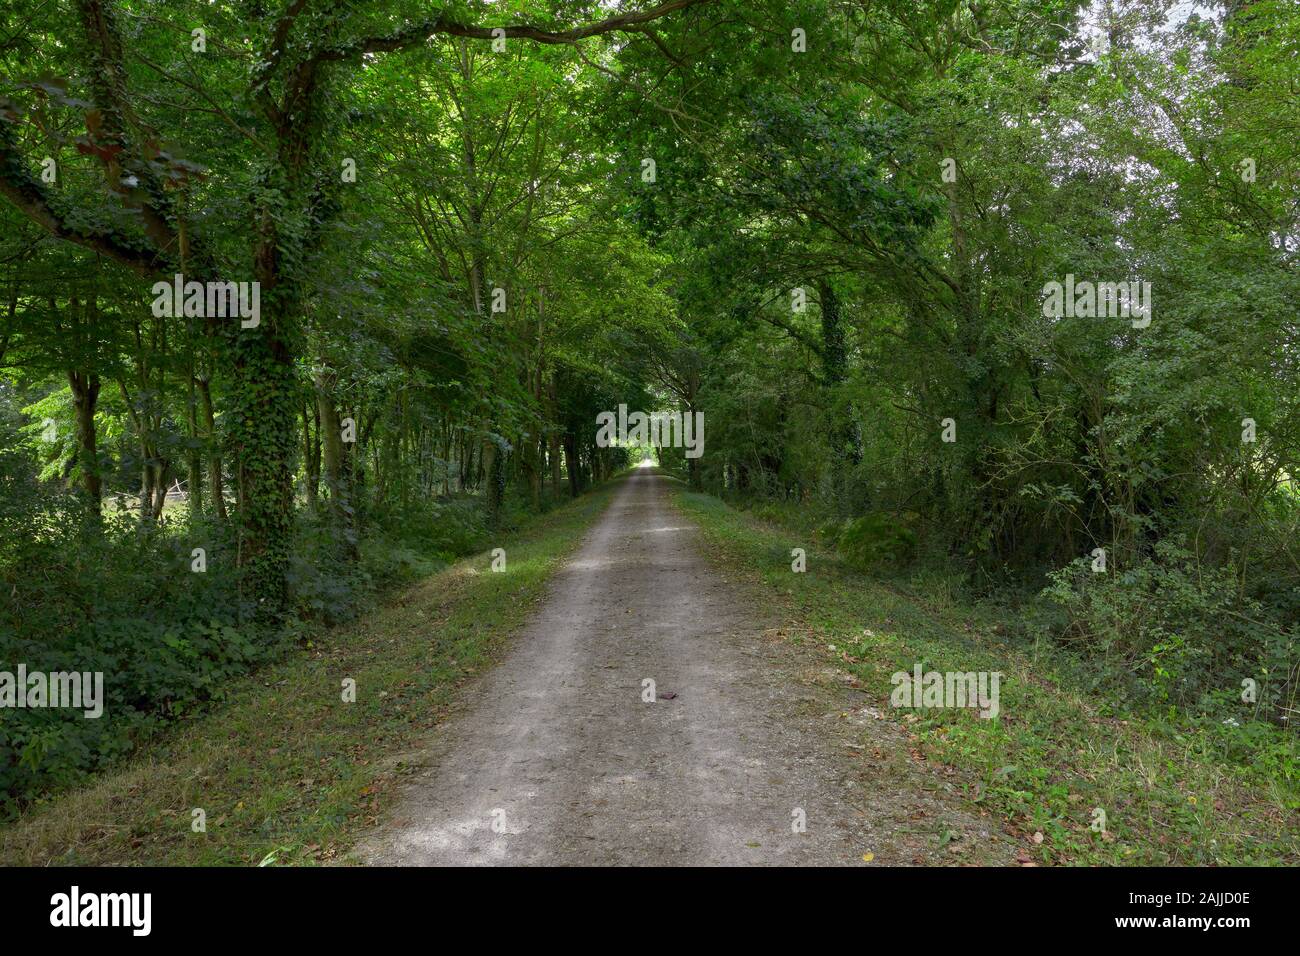 Image of the Voie Verte greenway track. Former railway track in Brittany, France Stock Photo